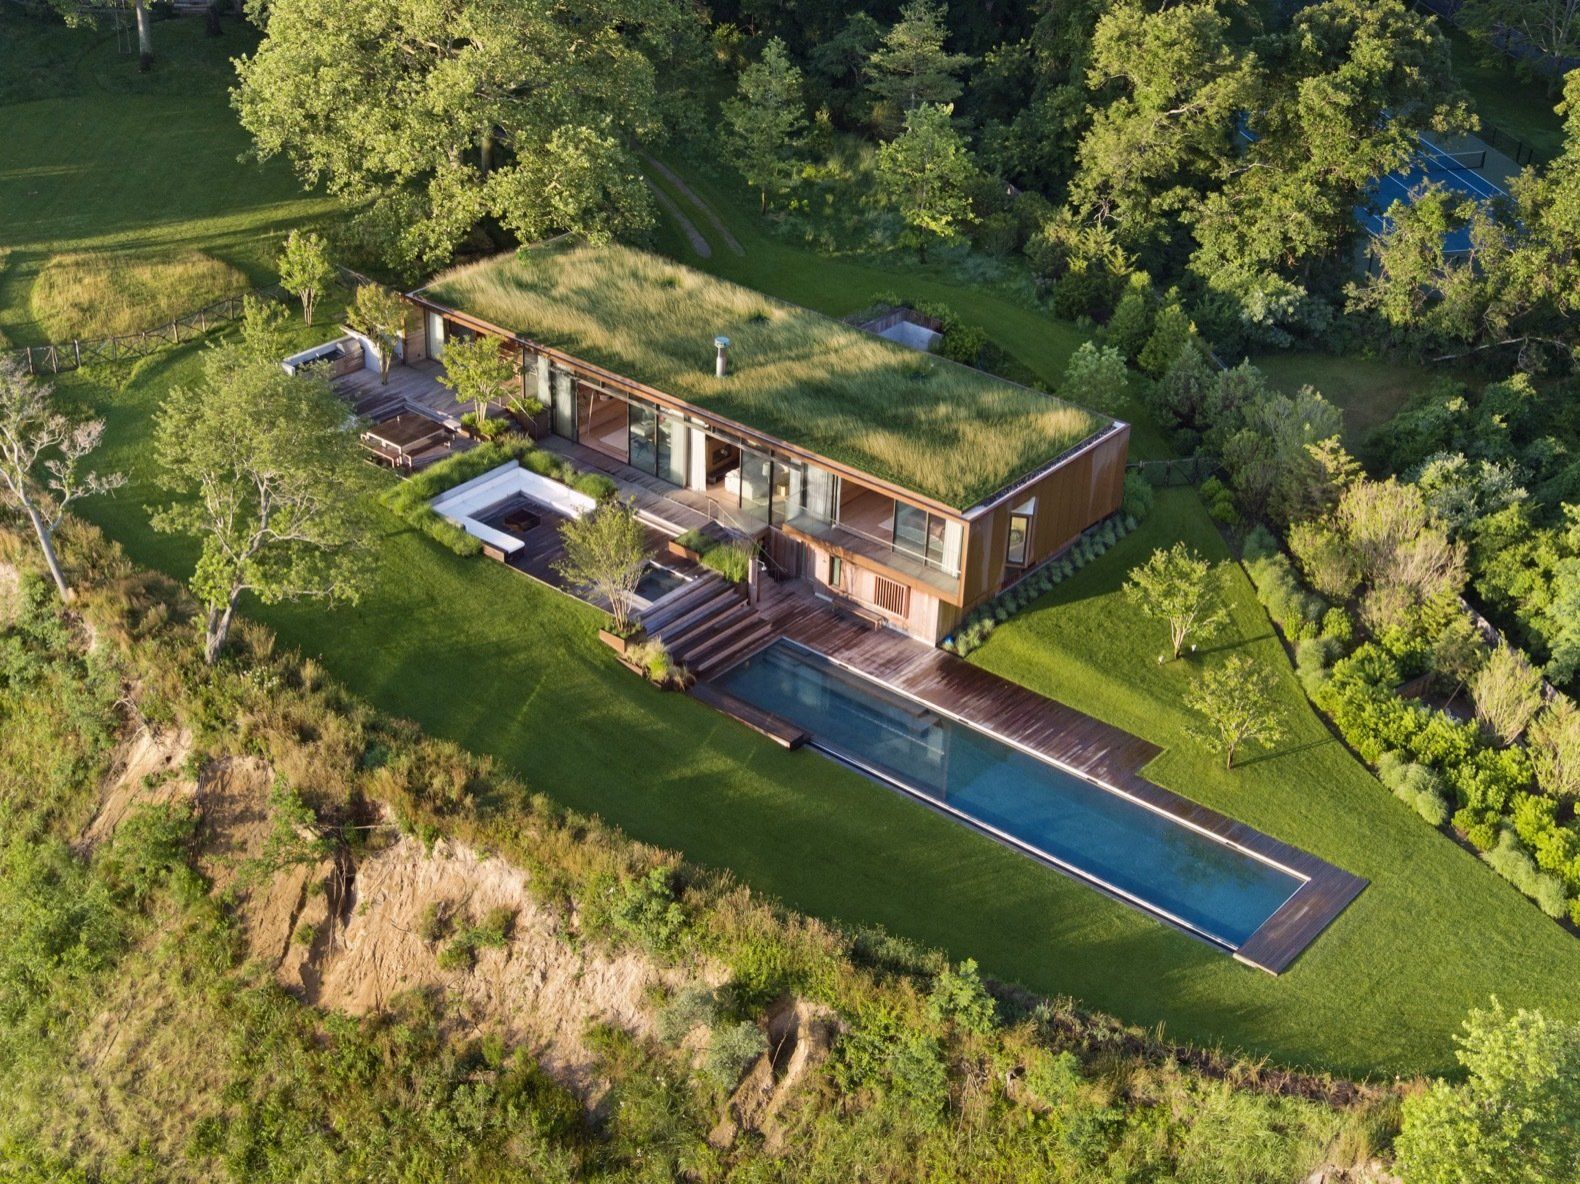 This Hamptons Getaway Blends Seamlessly Into a Lush Landscape